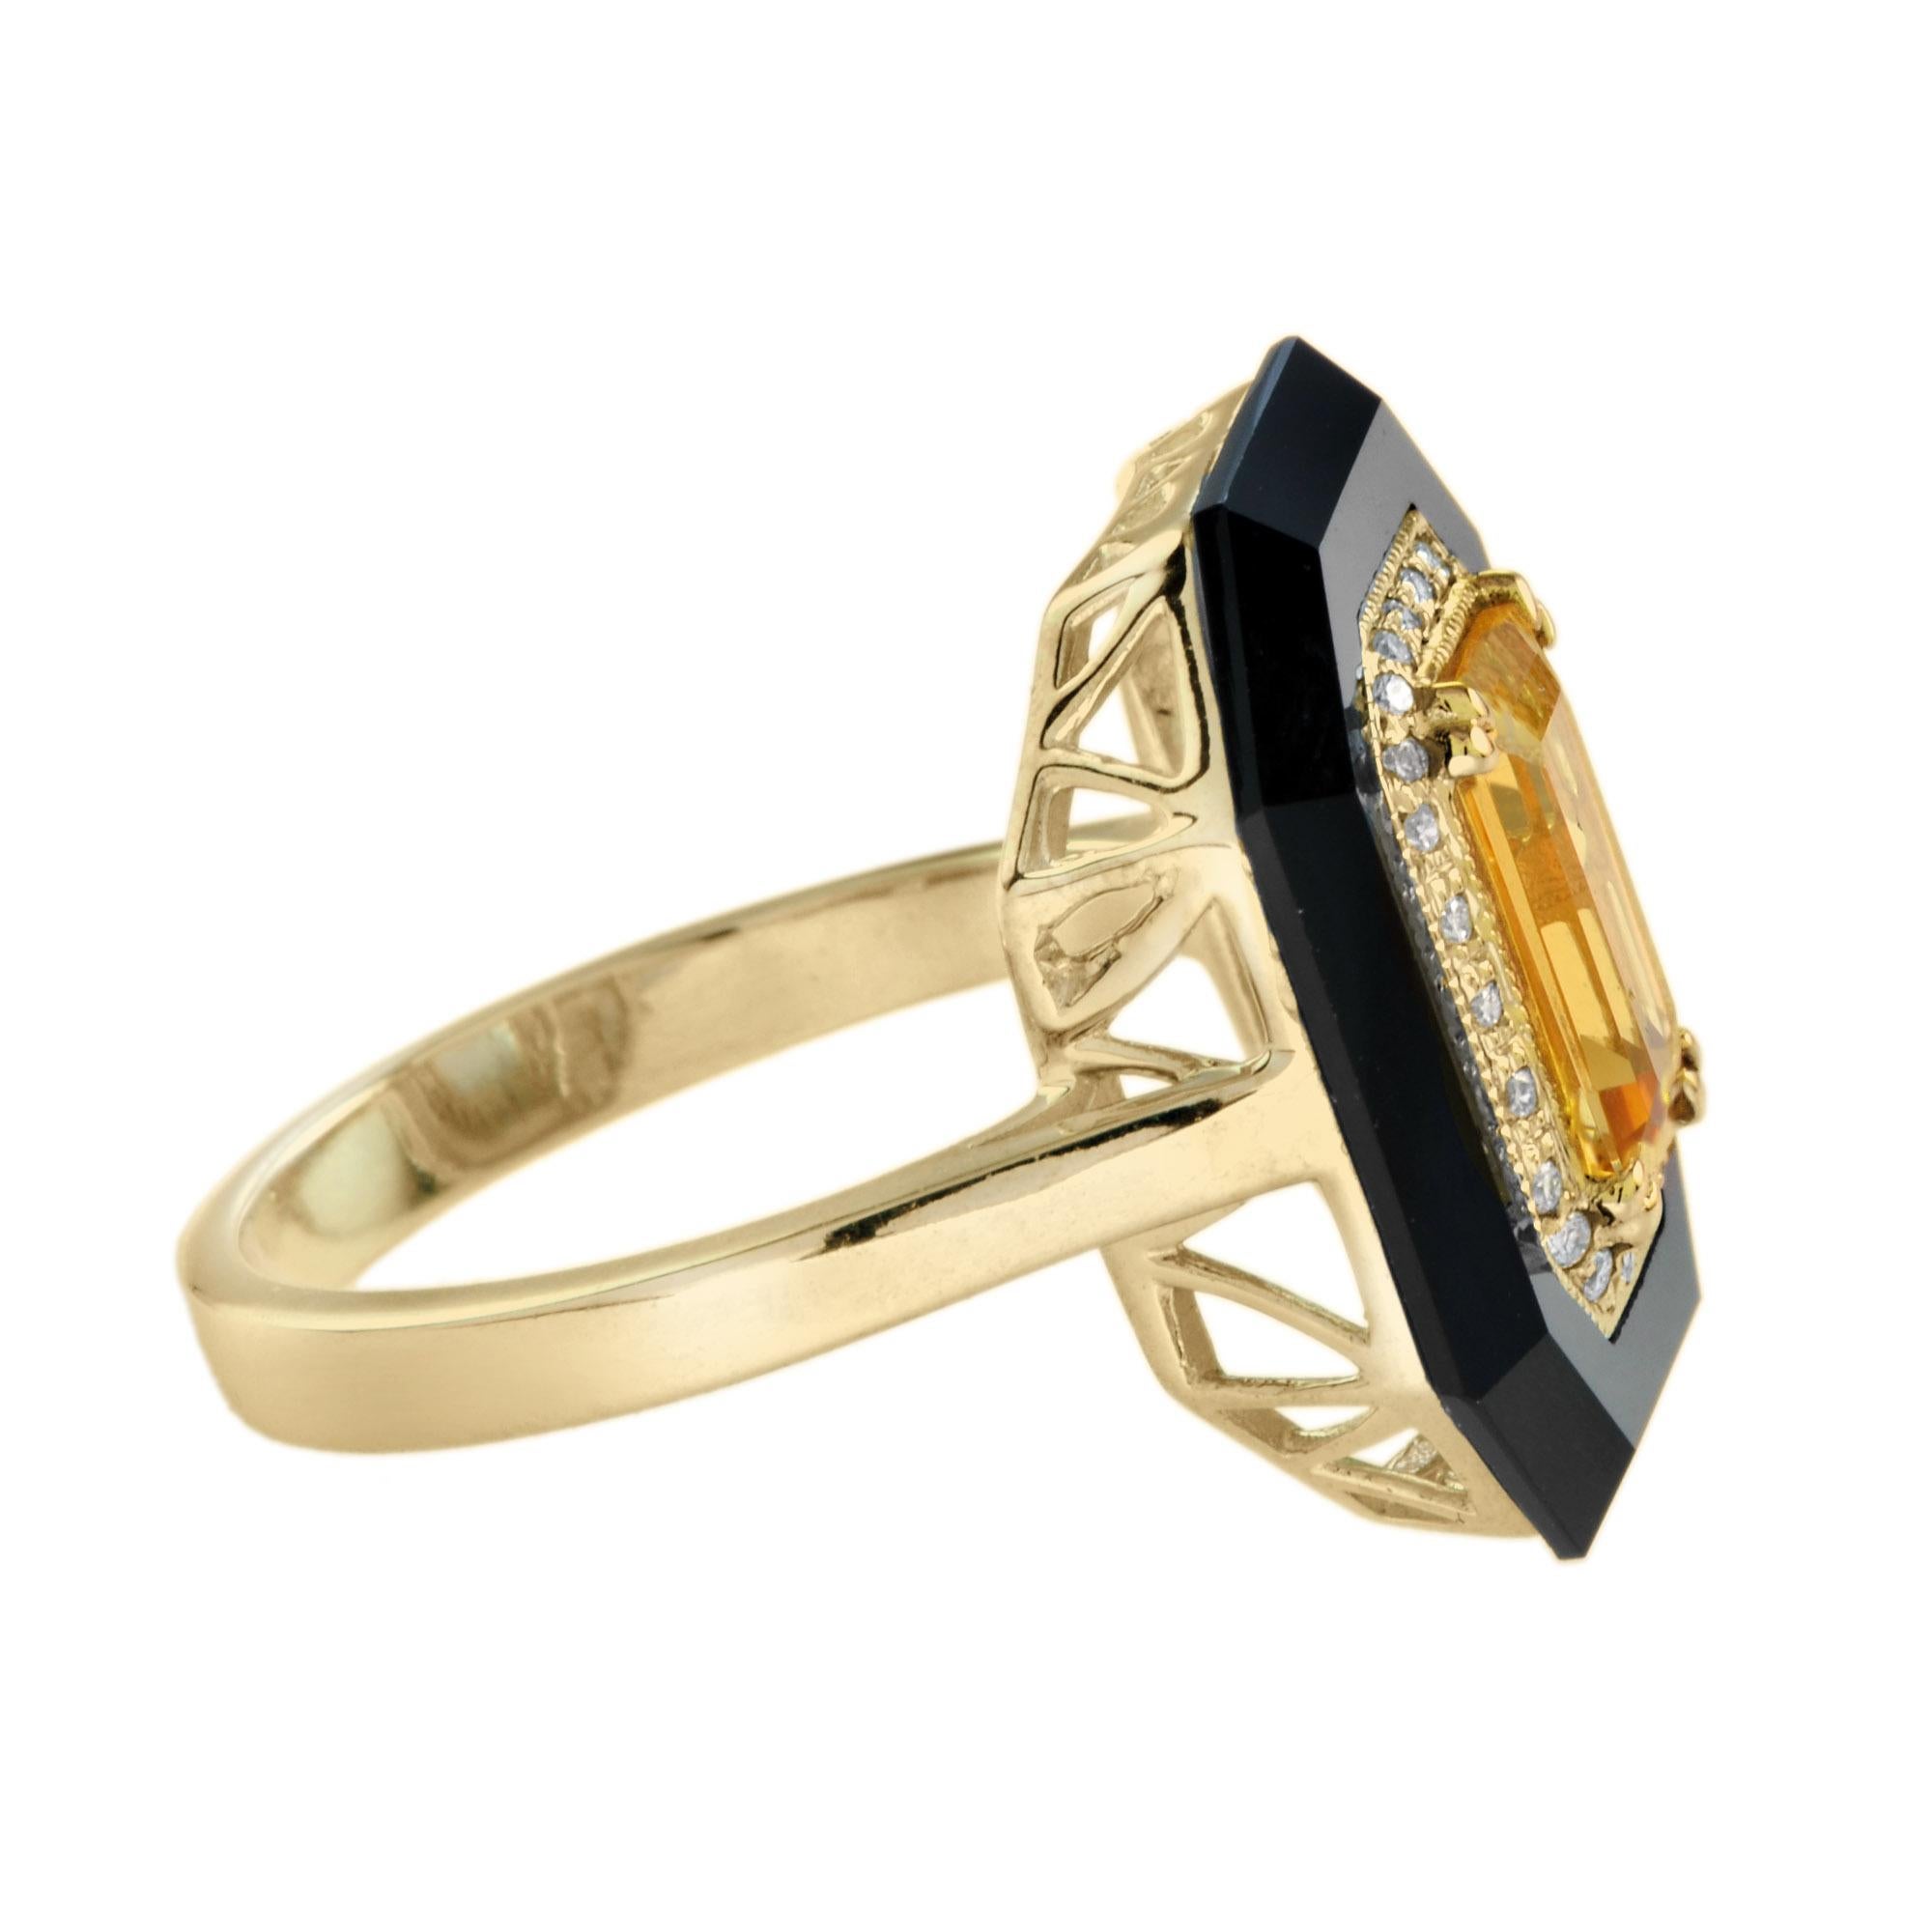 For Sale:  Citrine with Diamond and Onyx Art Deco Style Cocktail Ring in 14K Yellow Gold 4